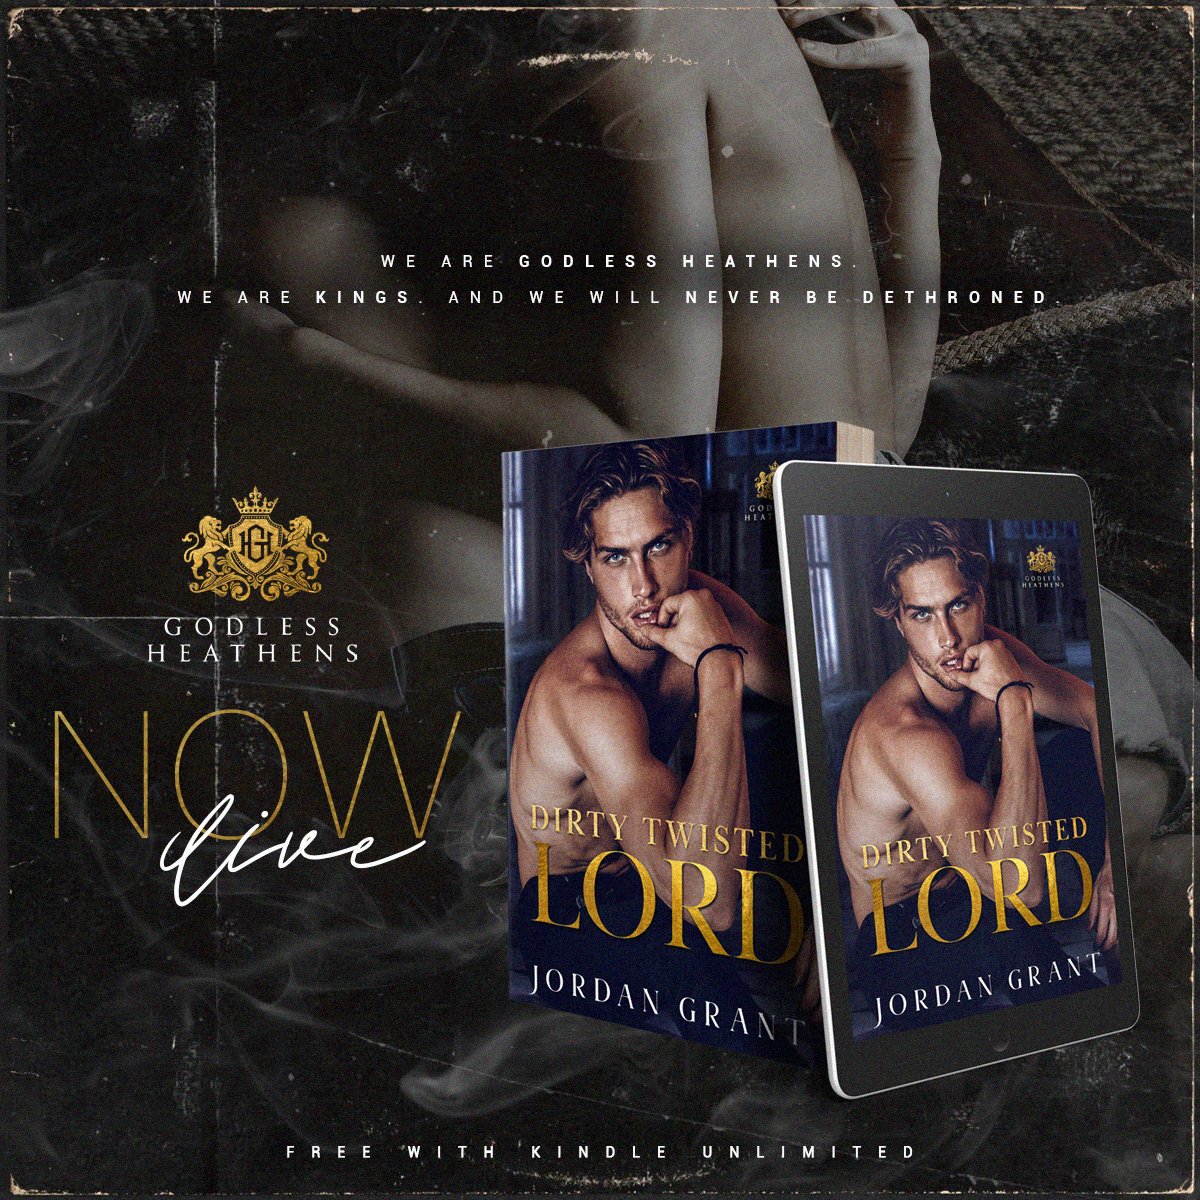 ✩🌟 HOT New Release🌟✩
 Dirty Twisted Lord by @authorjgrant is LIVE! #gothicromance #bullyromance #dirtytwistedlord #darkromance #godlessheathens #kindleunlimited #darkasylumromance #jordangrant #dsbookpromotions
Hosted by @DS_Promotions1

Buy HERE ↙️ books2read.com/DirtyTwistedLo…